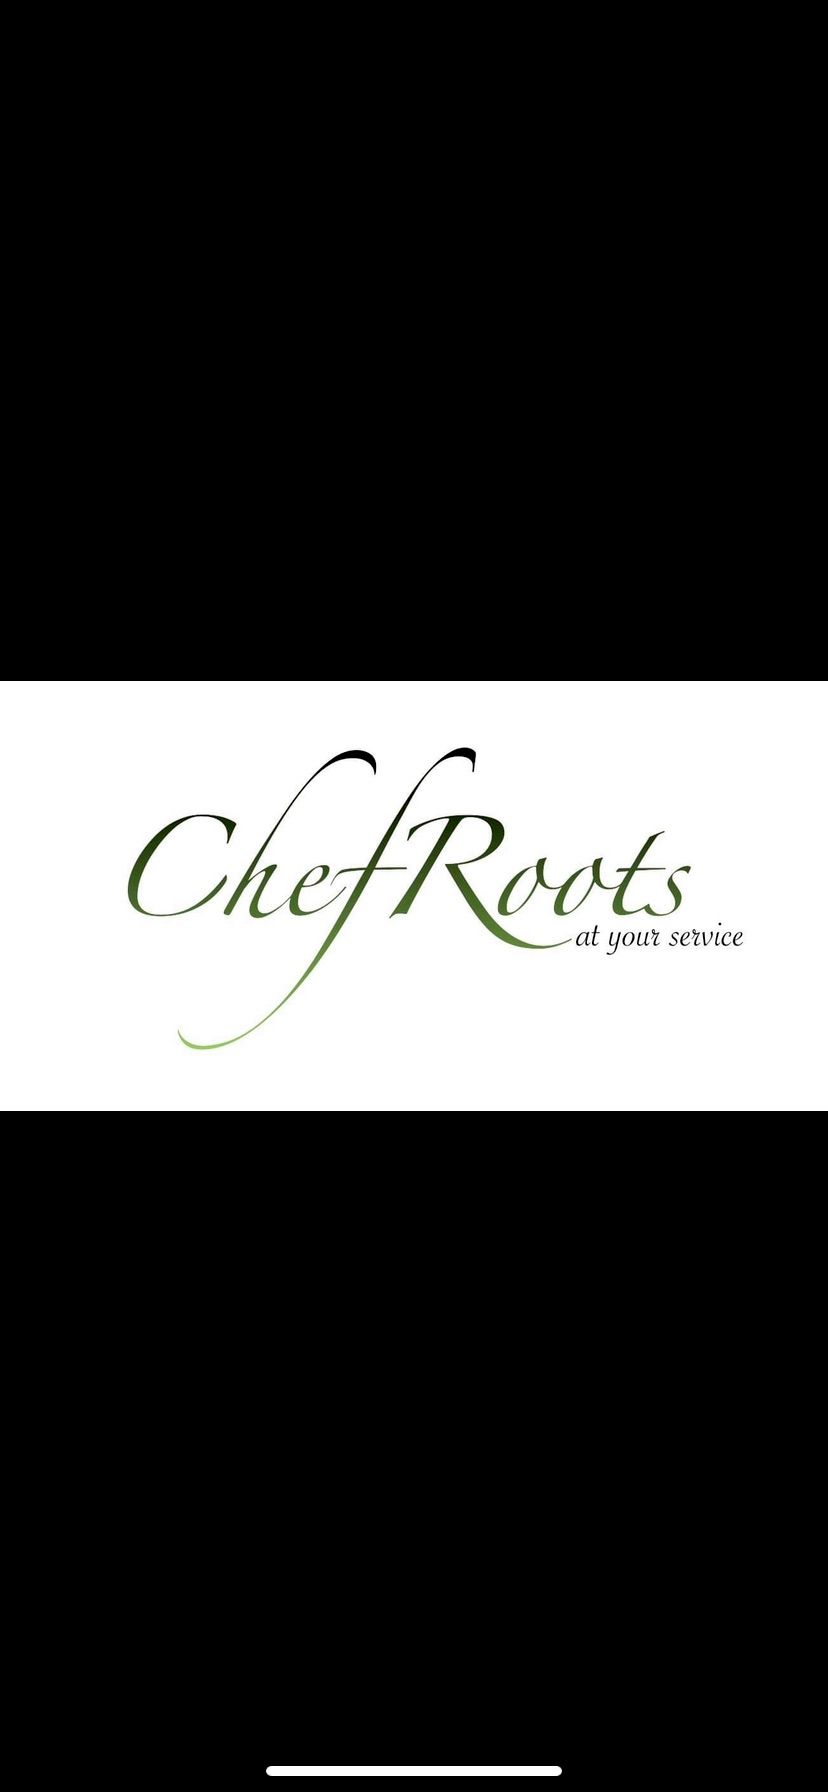 Chef Roots Catering